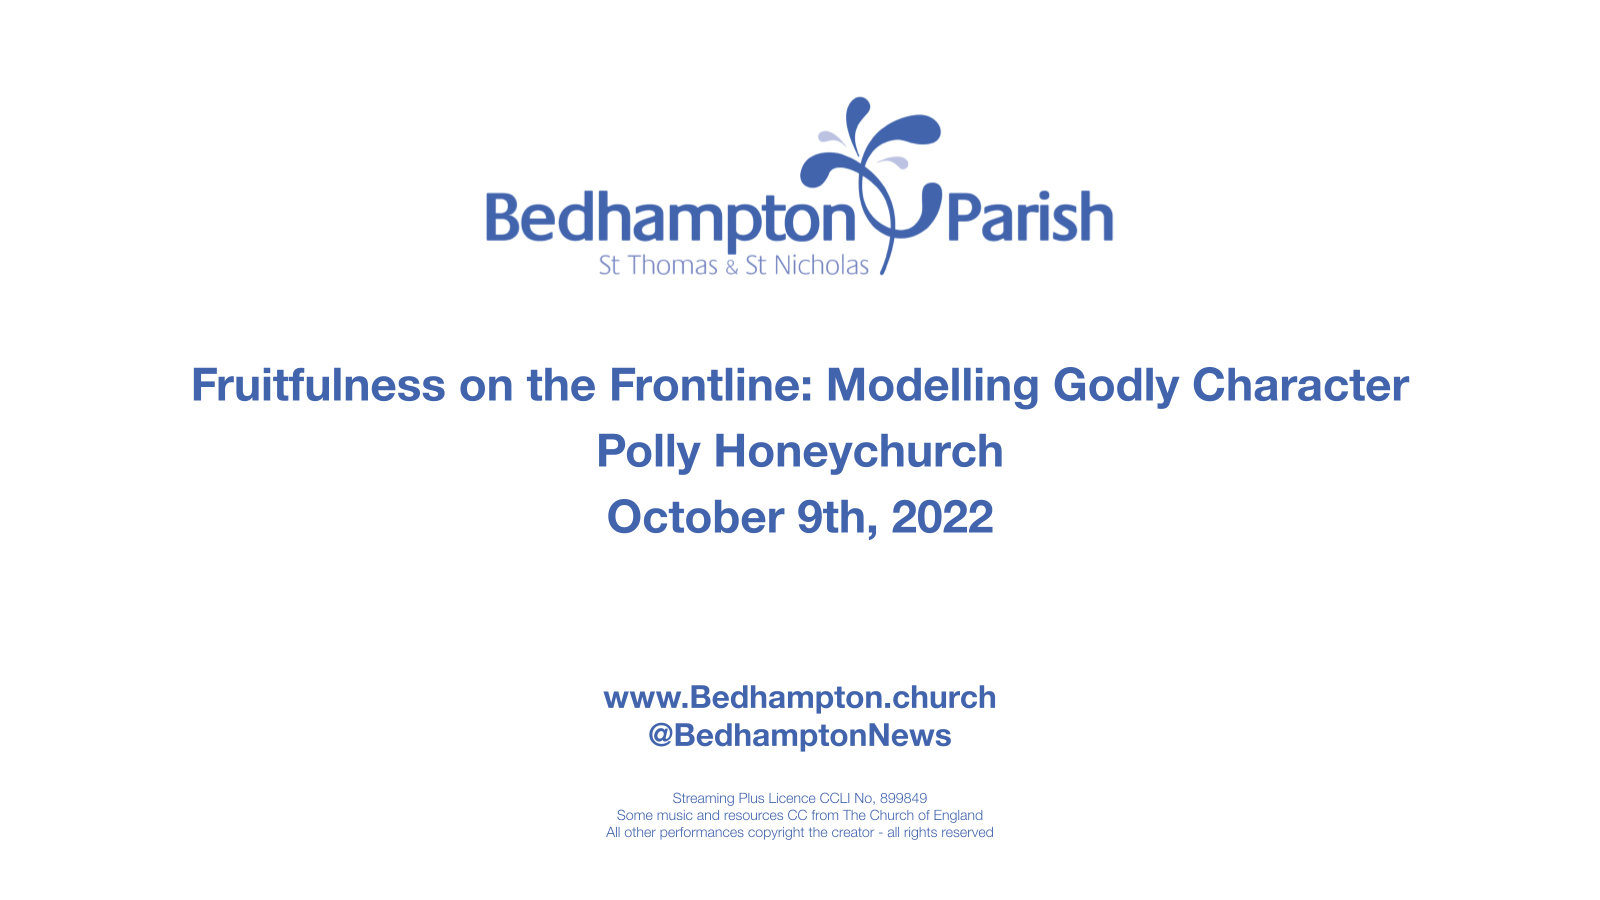 Sermon October 9th, 2022 – Fruitfulness on the Frontline: Modelling Godly Character